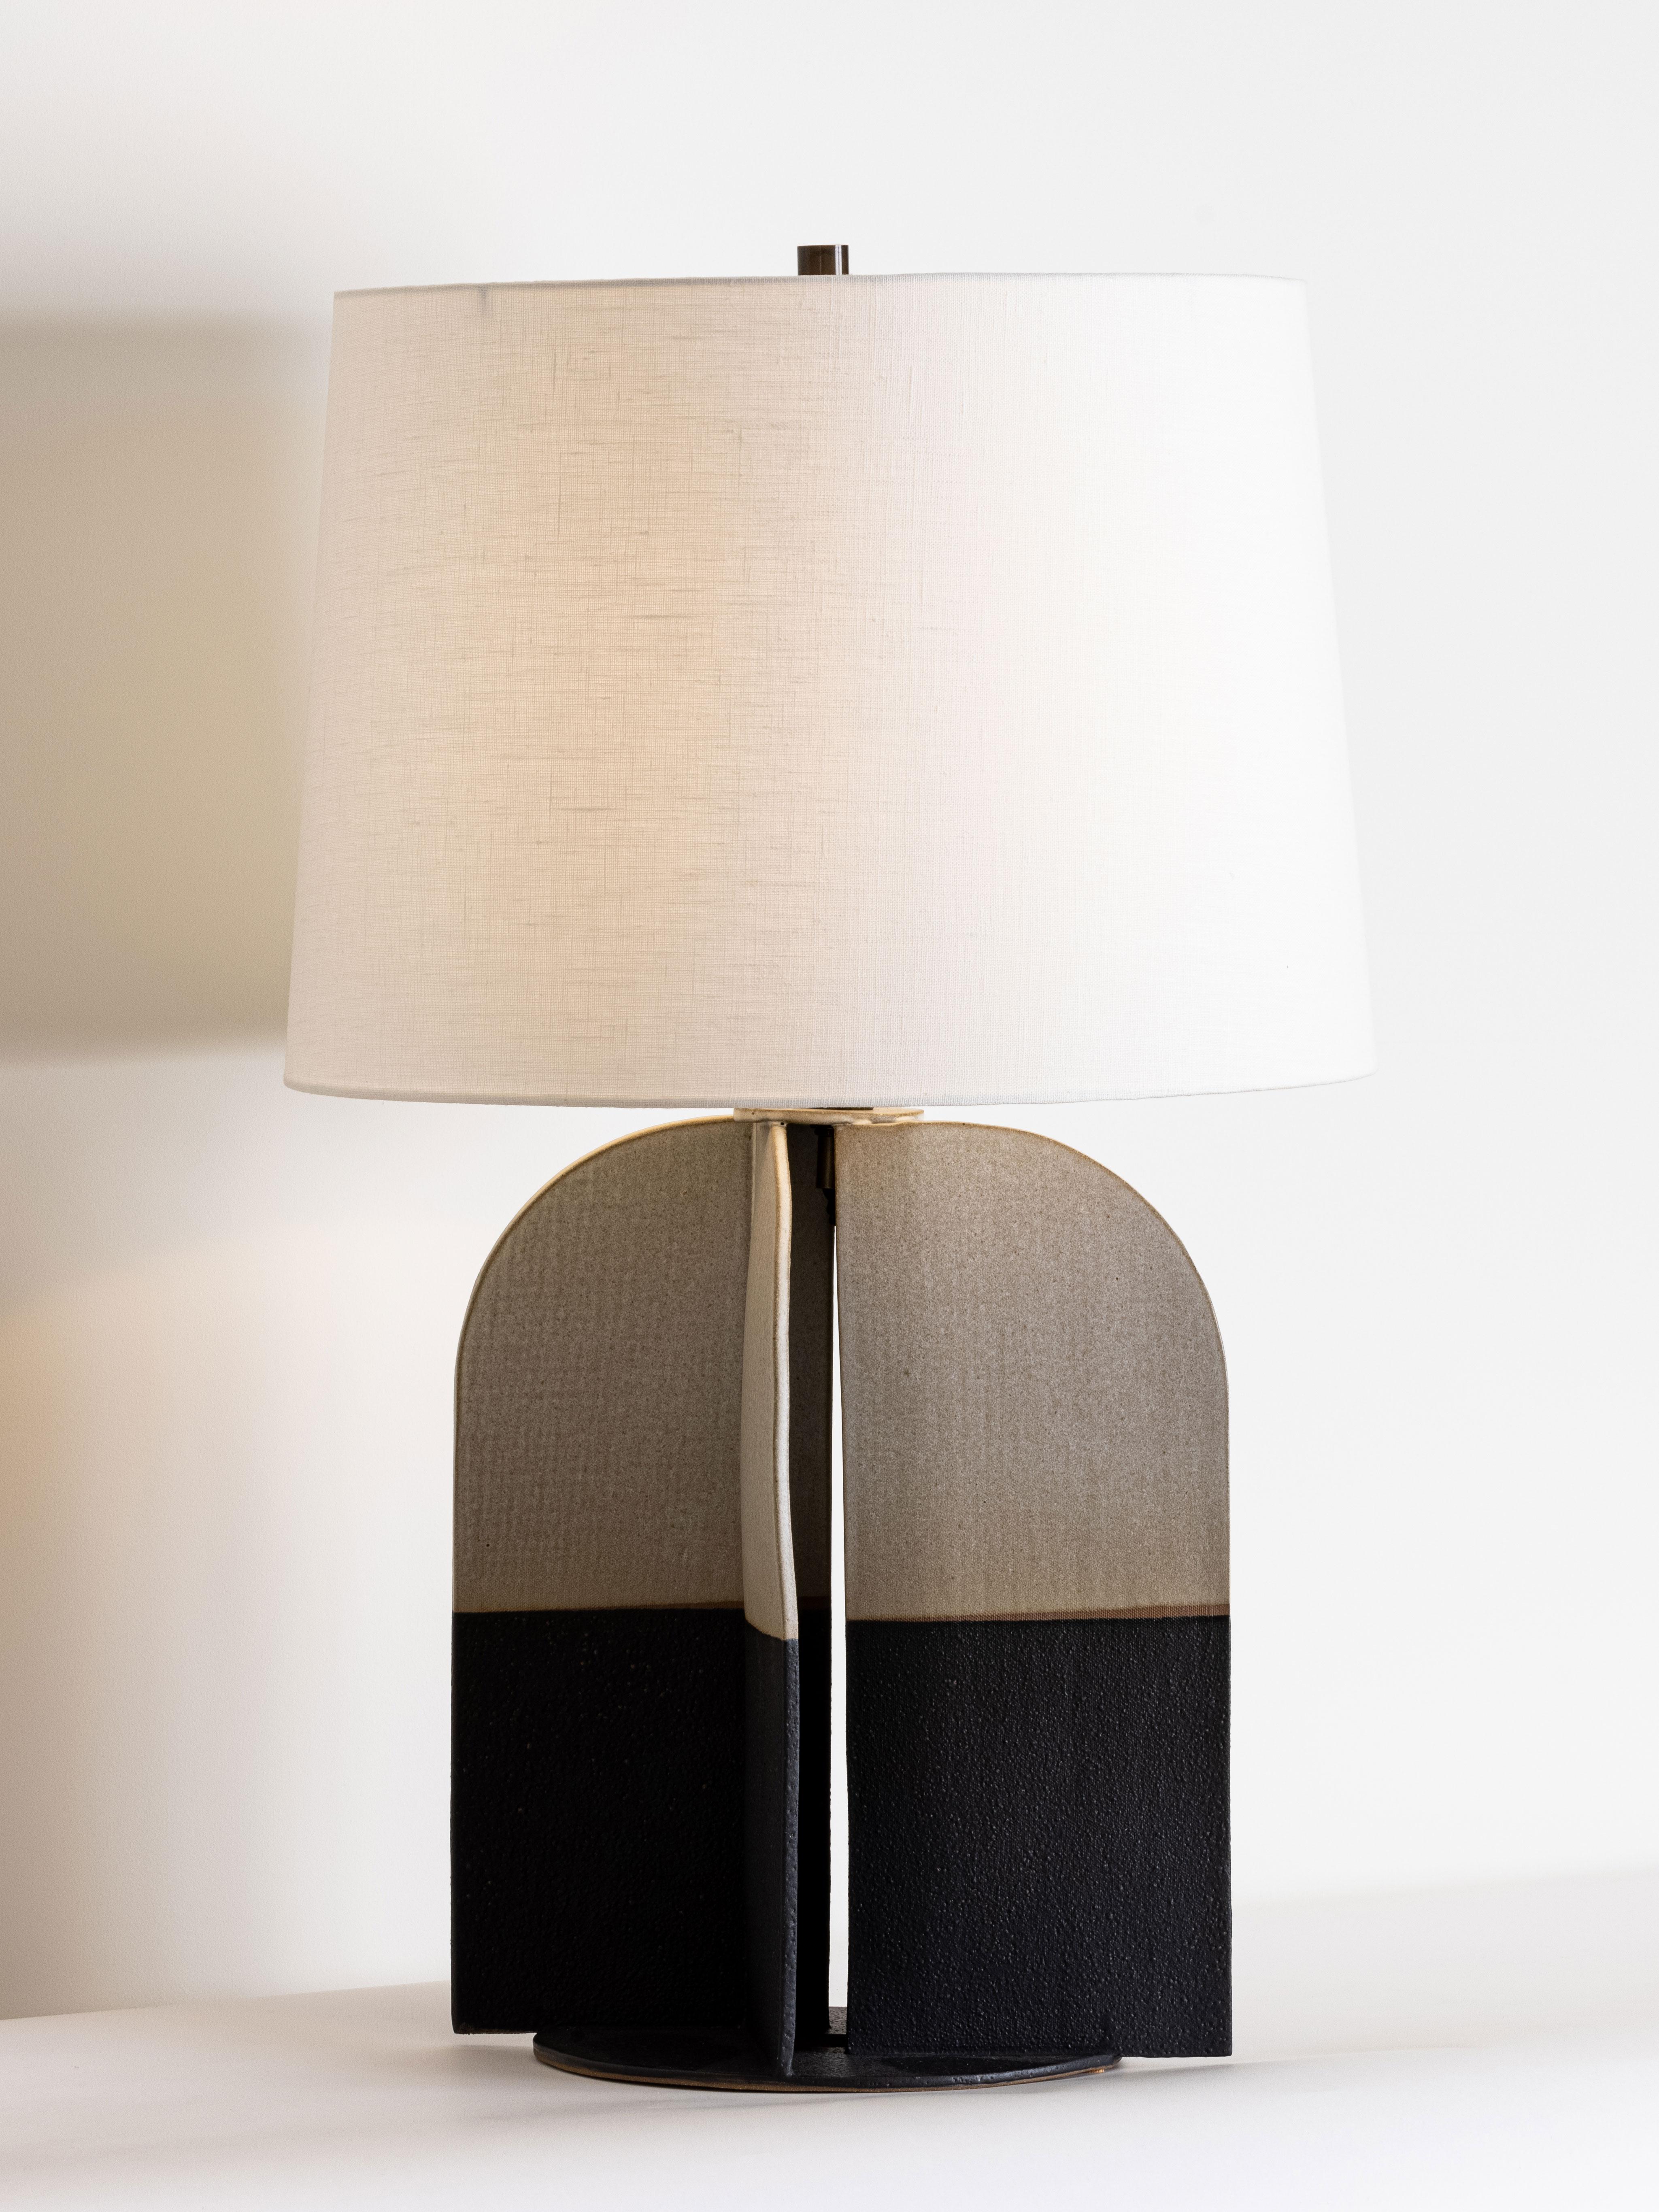 Our stoneware Hudson Lamp is handcrafted using slab-construction techniques.

Finish

- Dipped glaze, pictured in matte-black & parchment 
- Antique brass fittings
- Twisted beige-cloth cord
- Full-range dimmer socket
- Off-white linen